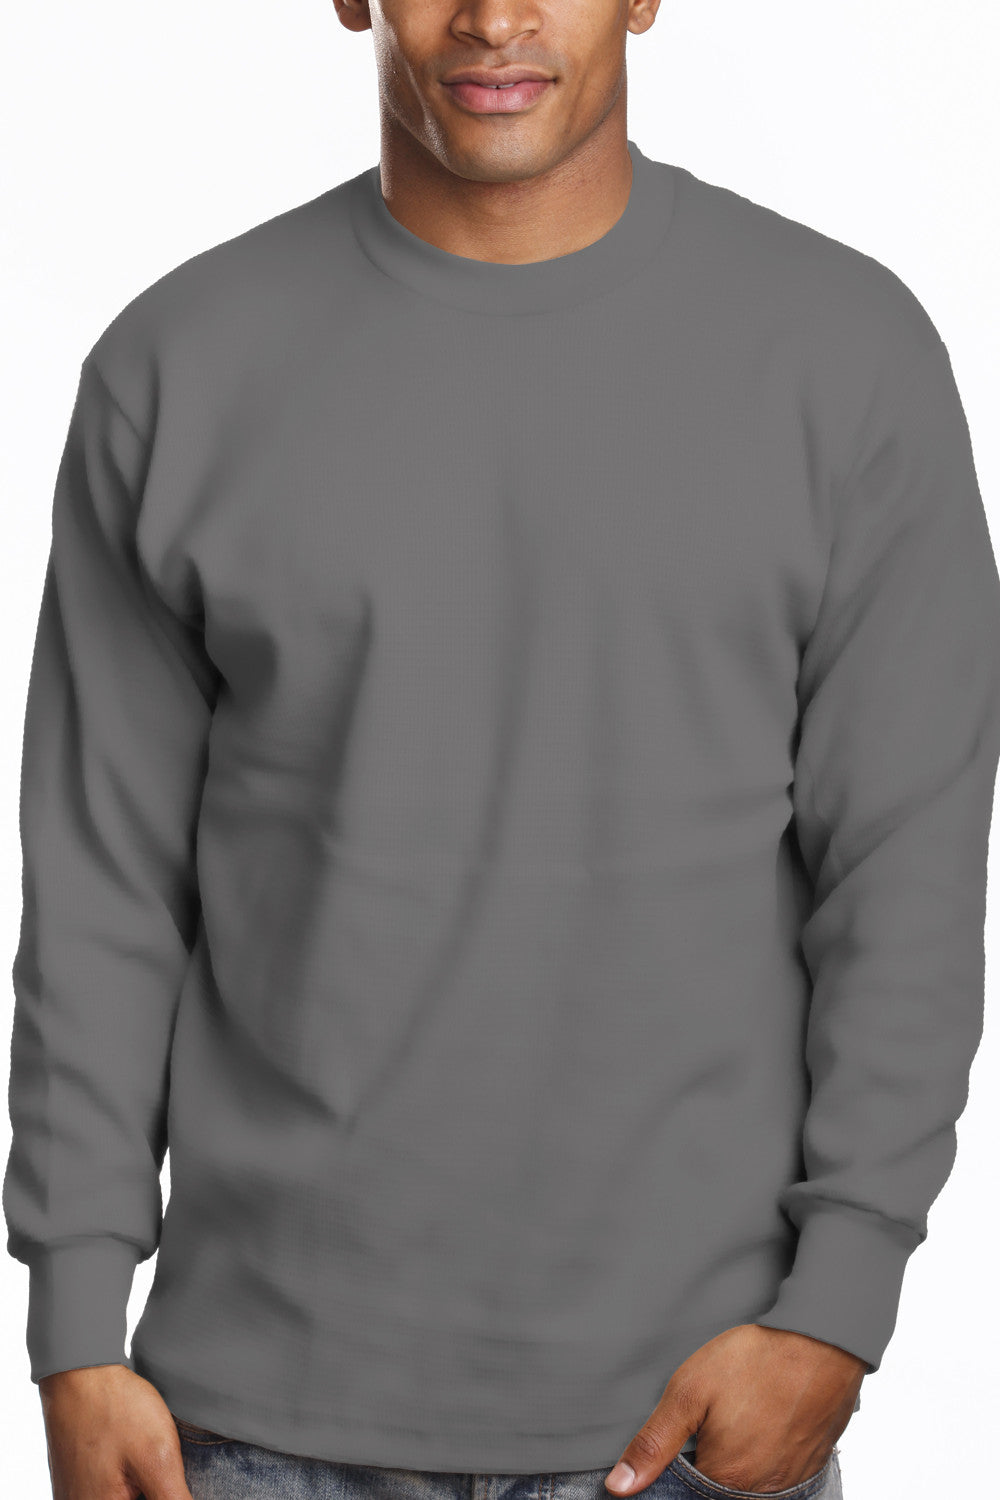 Super Heavy Dark Grey LS Tee: Classic long sleeve with a snug round neck, 6.7oz. Collar reinforced with Lycra for stretch. Vibrant colors stay bright. Made with U.S. cotton. Sizes: 2XL-7XL. Colors: White, Black, Grey, and more. Fabric: Solid-100% Cotton, Grey Shades-80% Cotton 20% Poly. Weight: 6.7 oz.